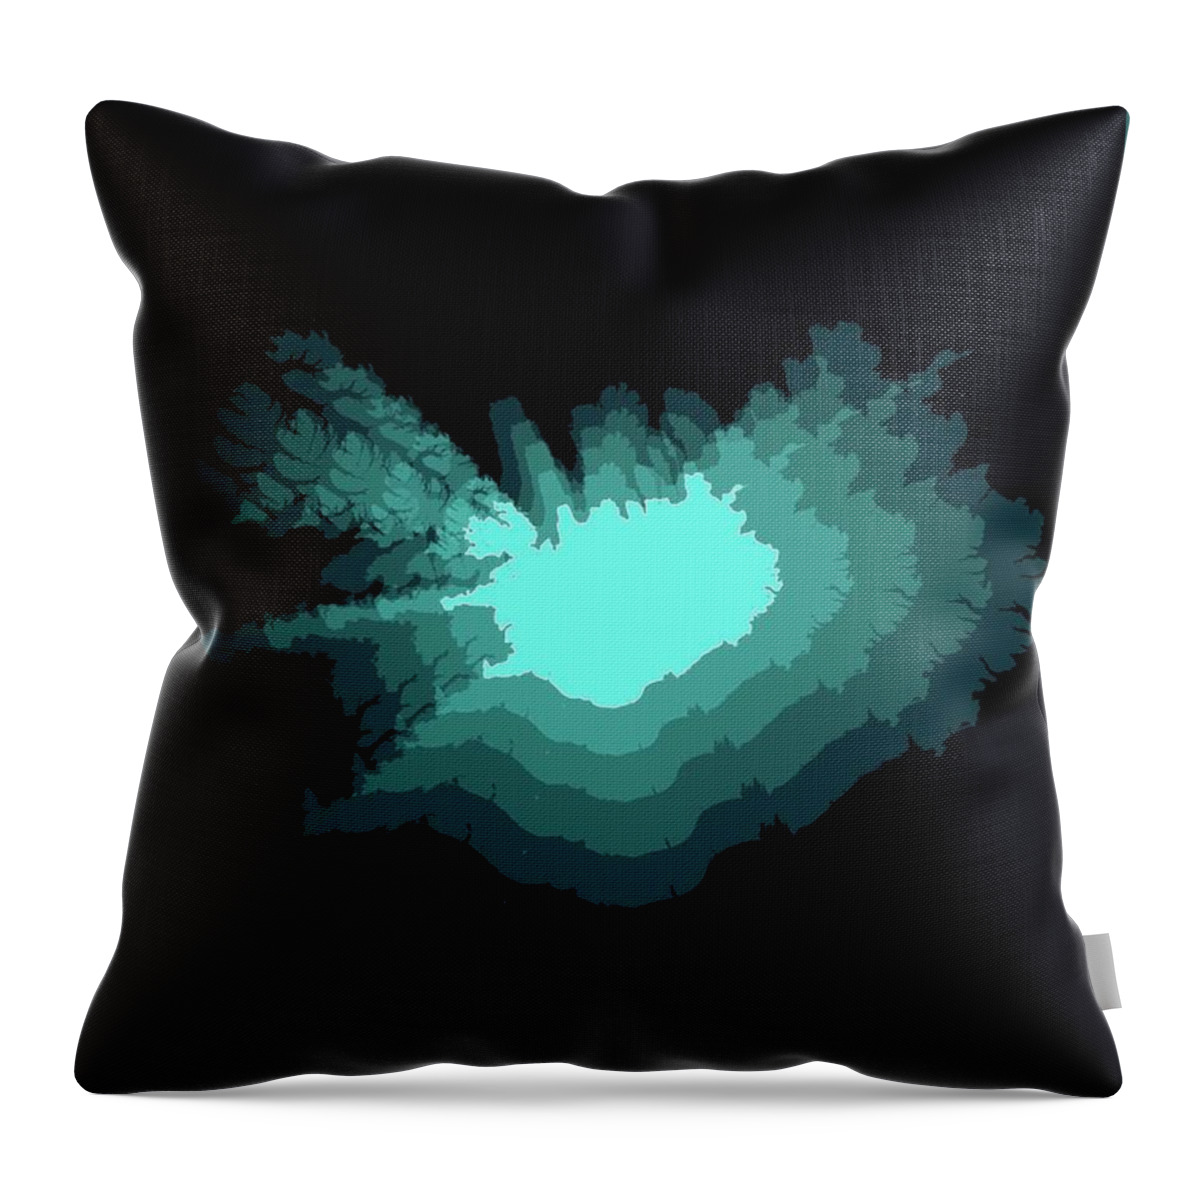  Throw Pillow featuring the digital art Iceland Radiant Map II by Naxart Studio